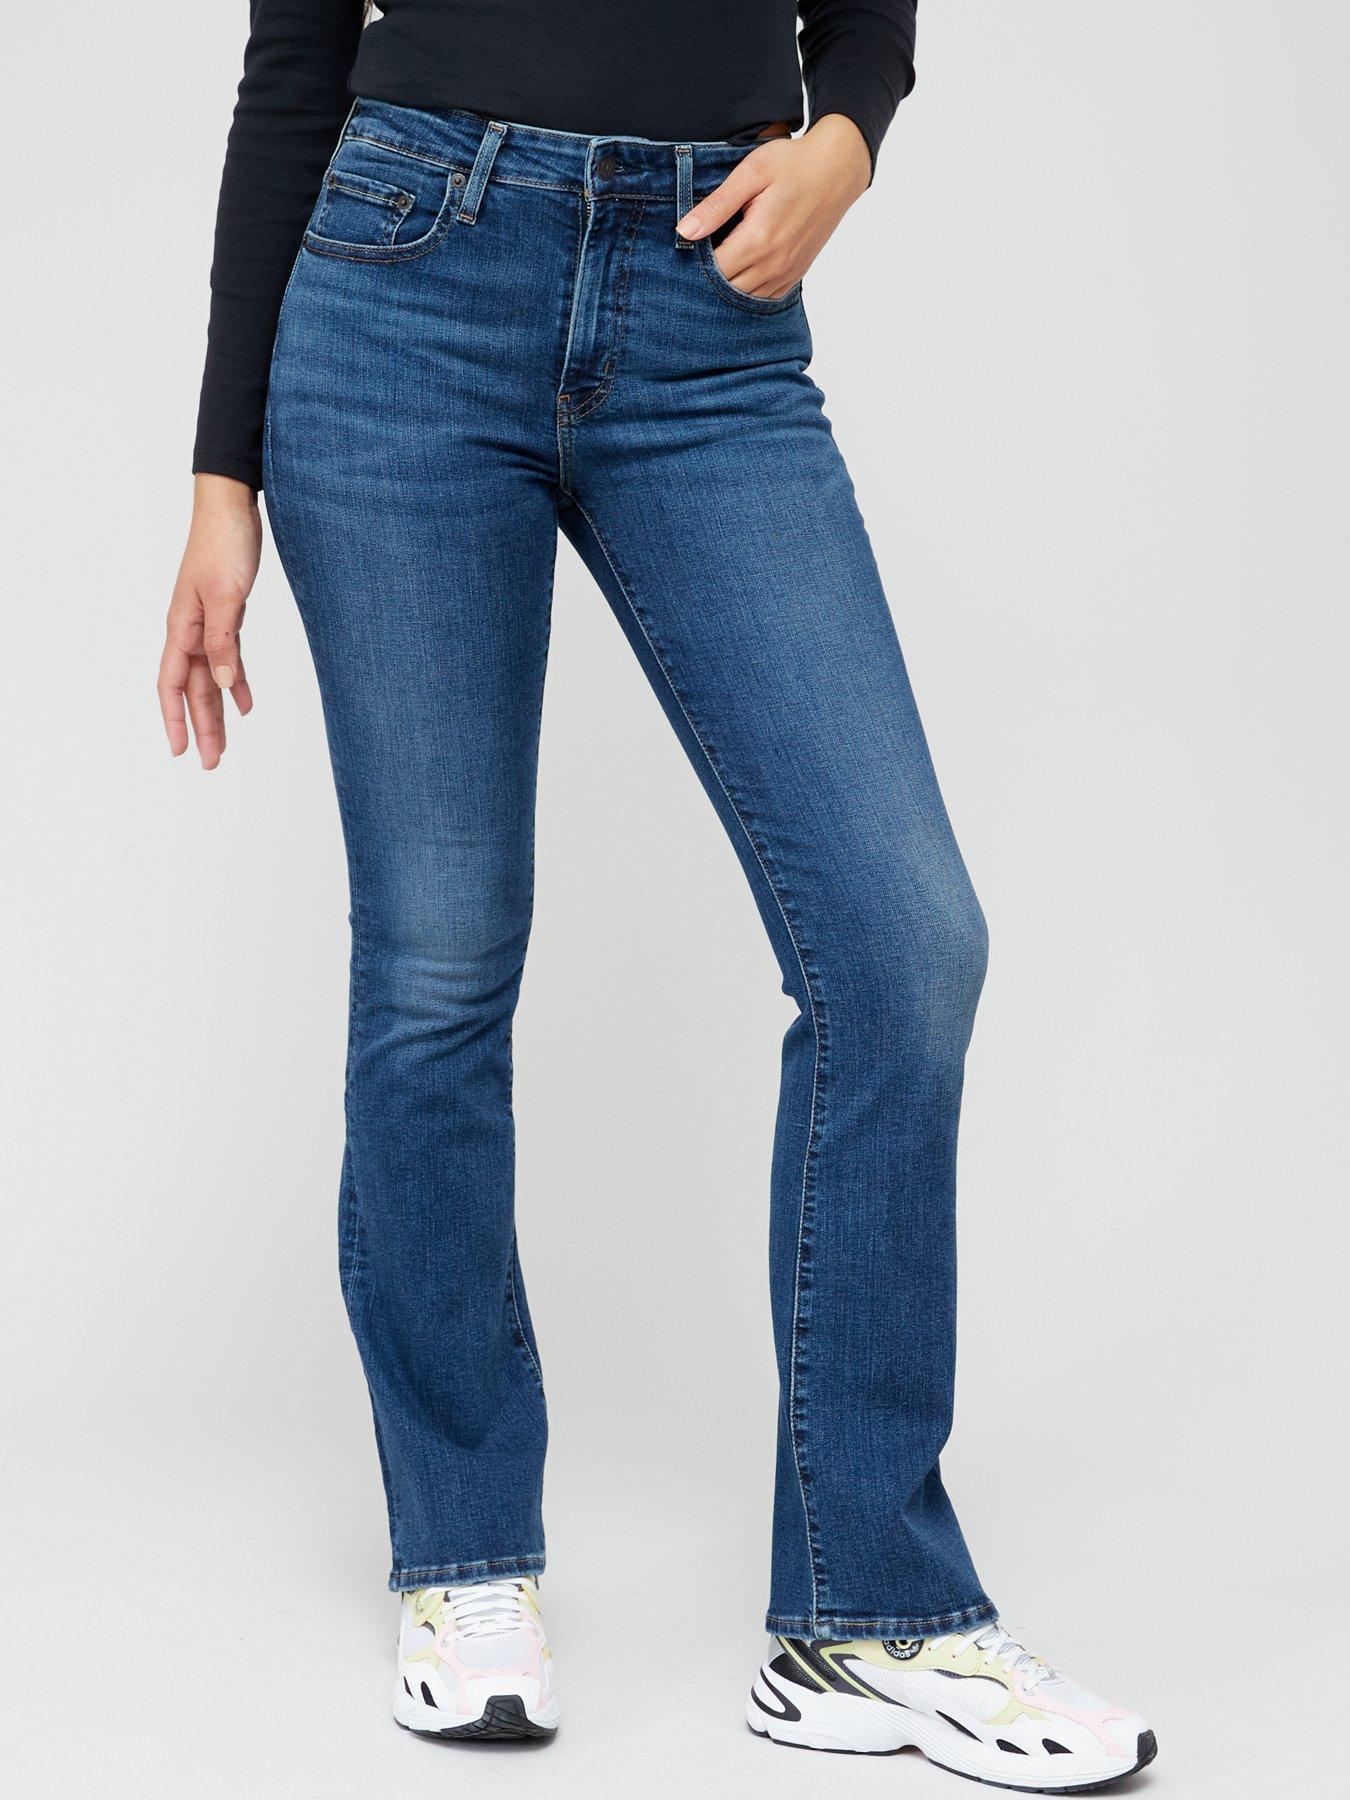 Product Name: Levi's Women's Dark Horse High Rise 725 Bootcut Jeans